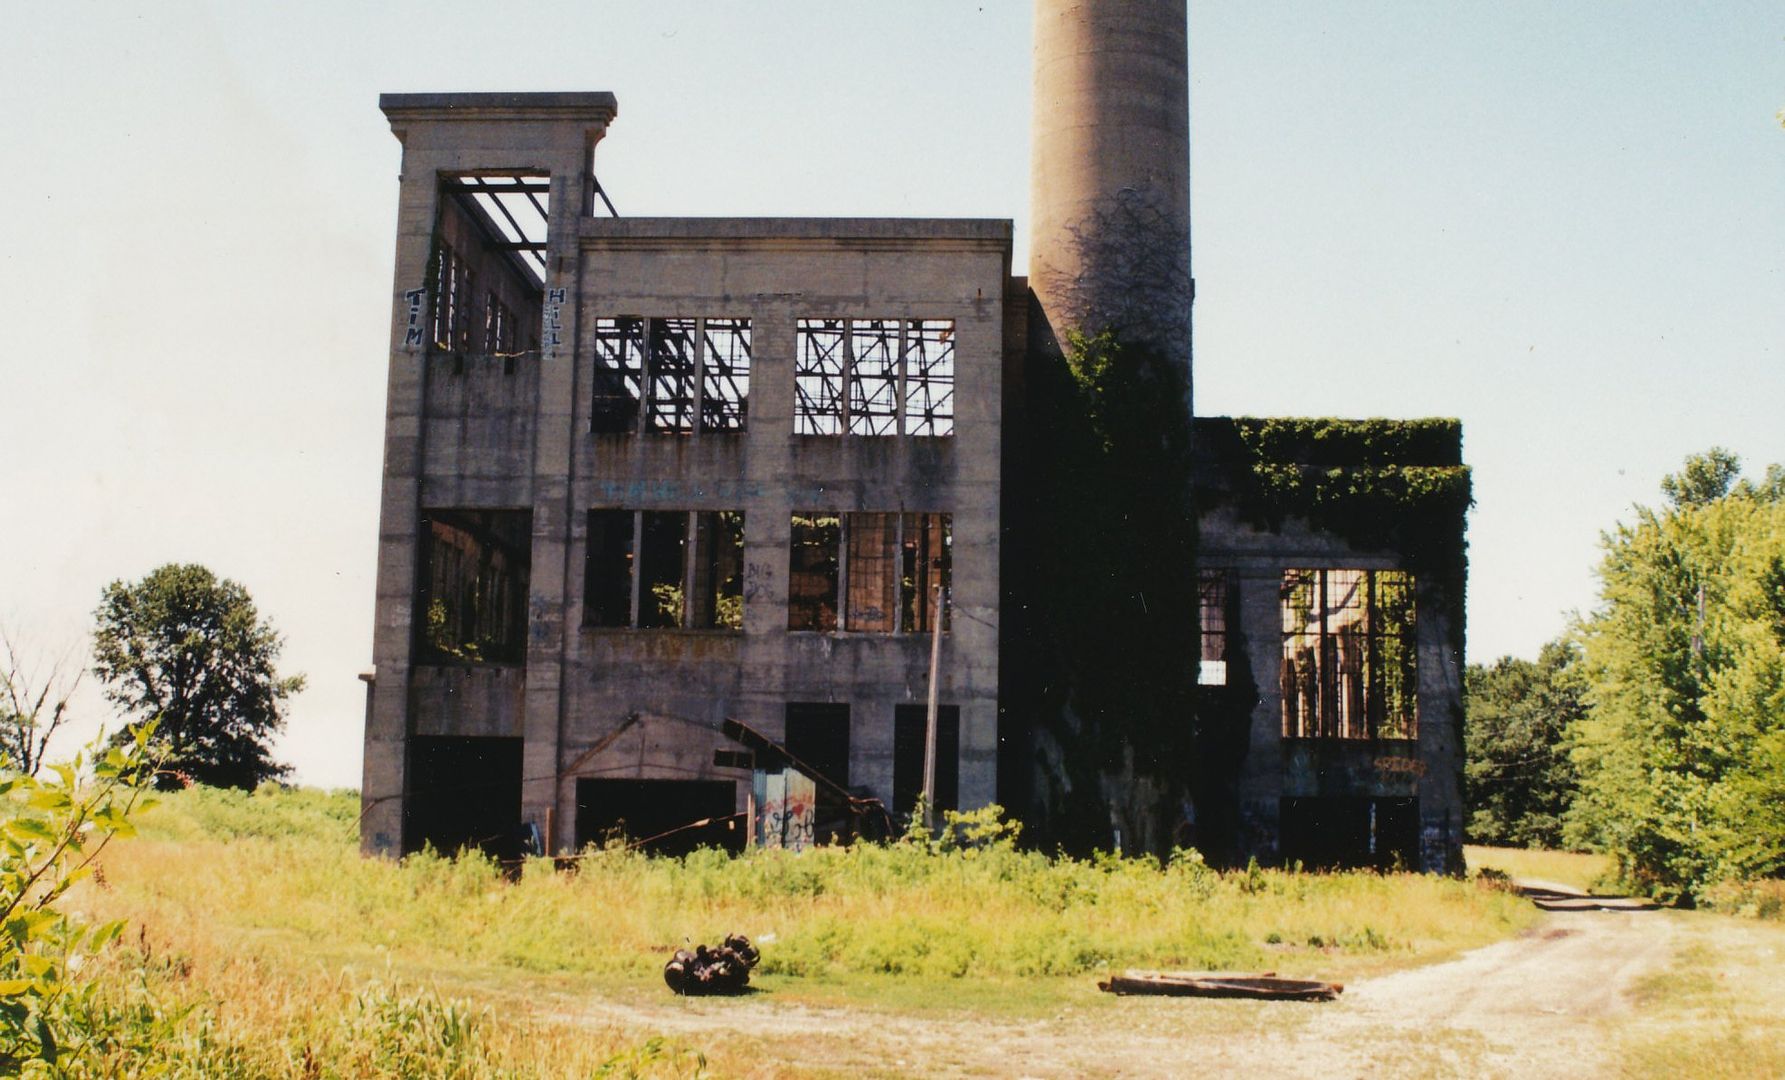 The Schoper Powerhouse, photographed in 2002, about a year before it was torn down. This building also houses offices for the Schoper Mine.